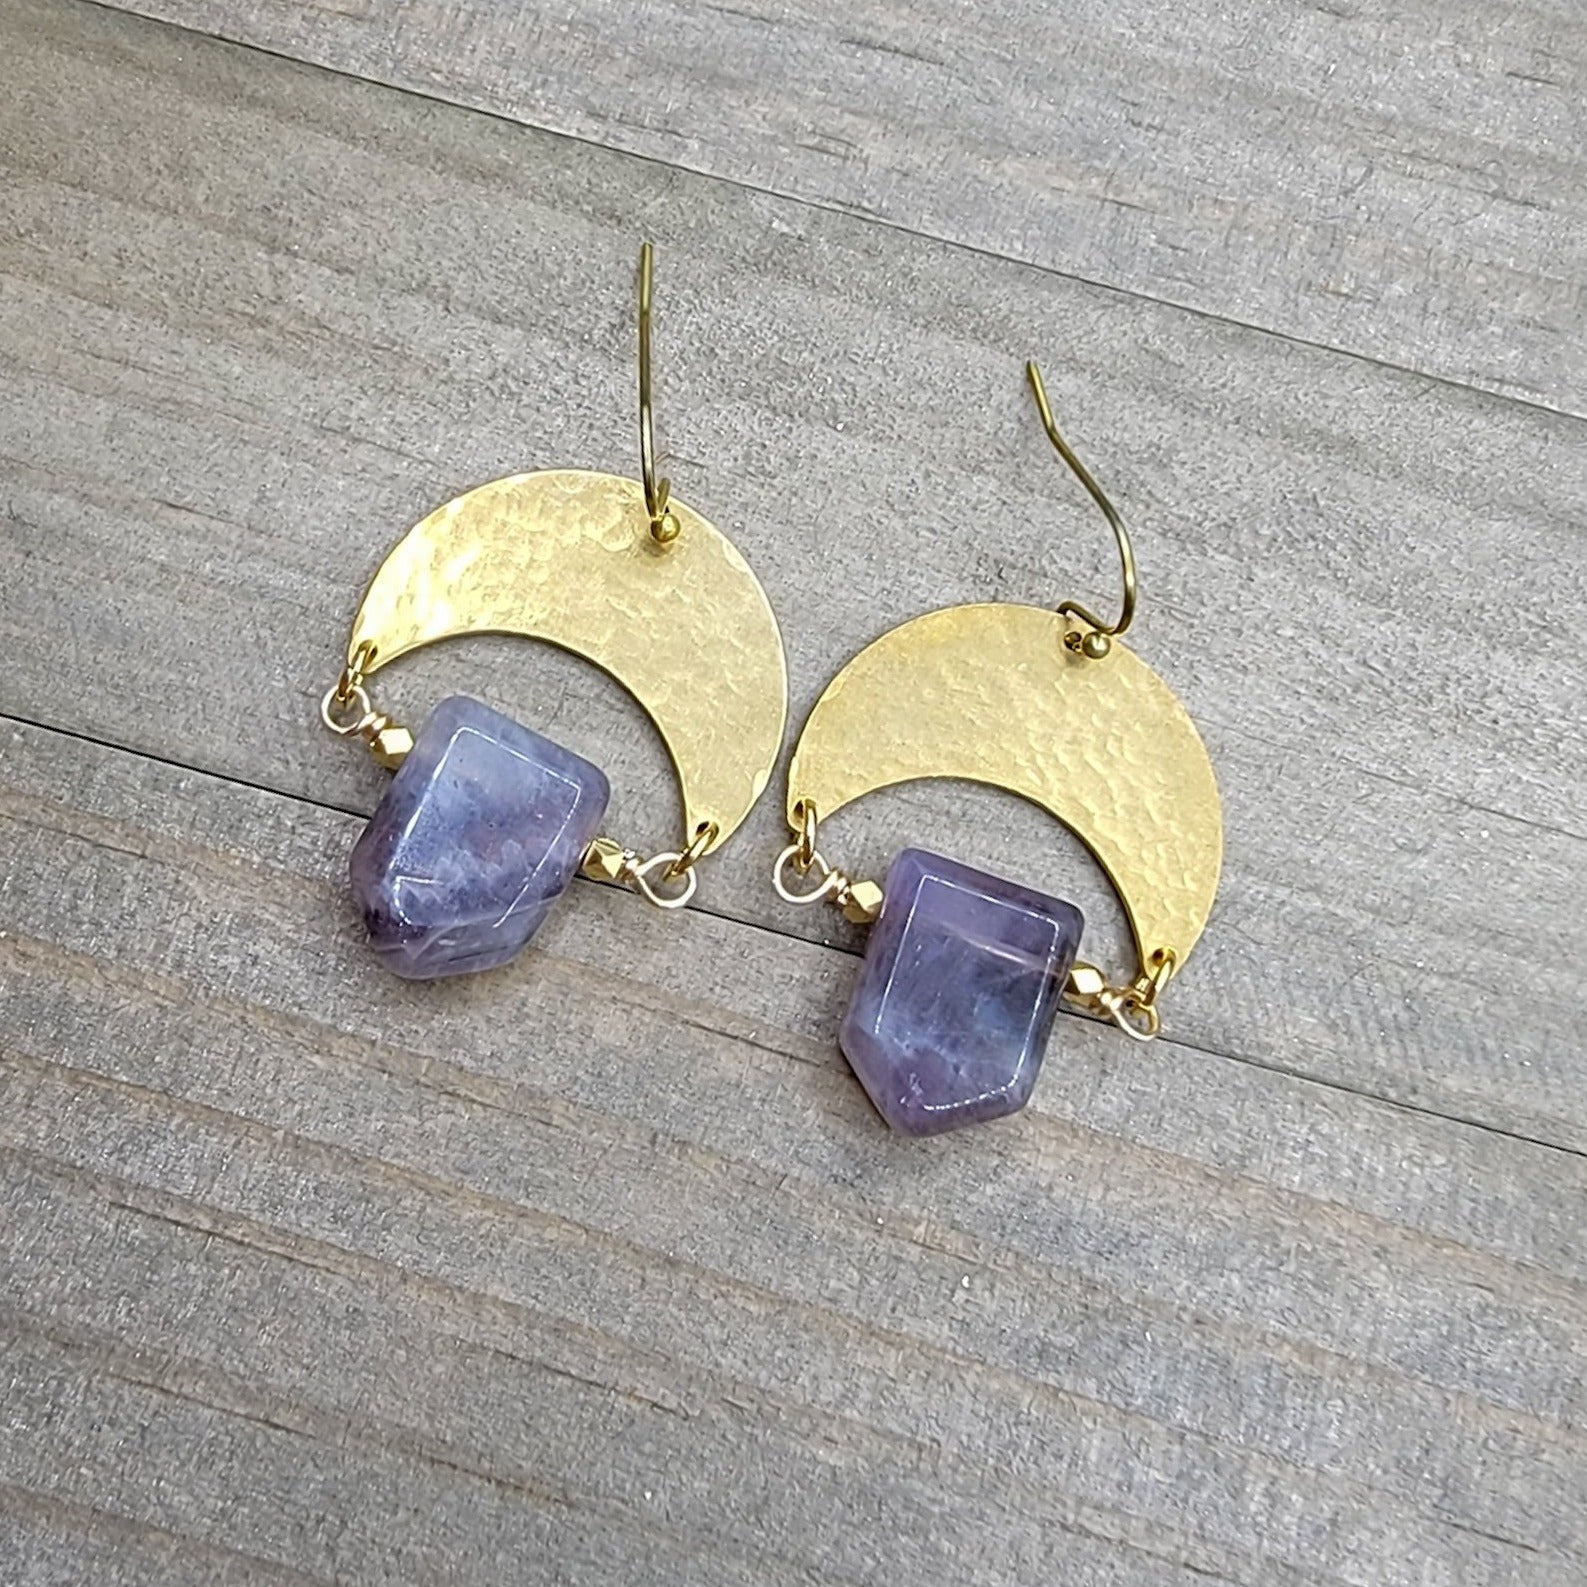 Hammered Brass Crescent Circle Earrings with Amethyst - Nicki Lynn Jewelry